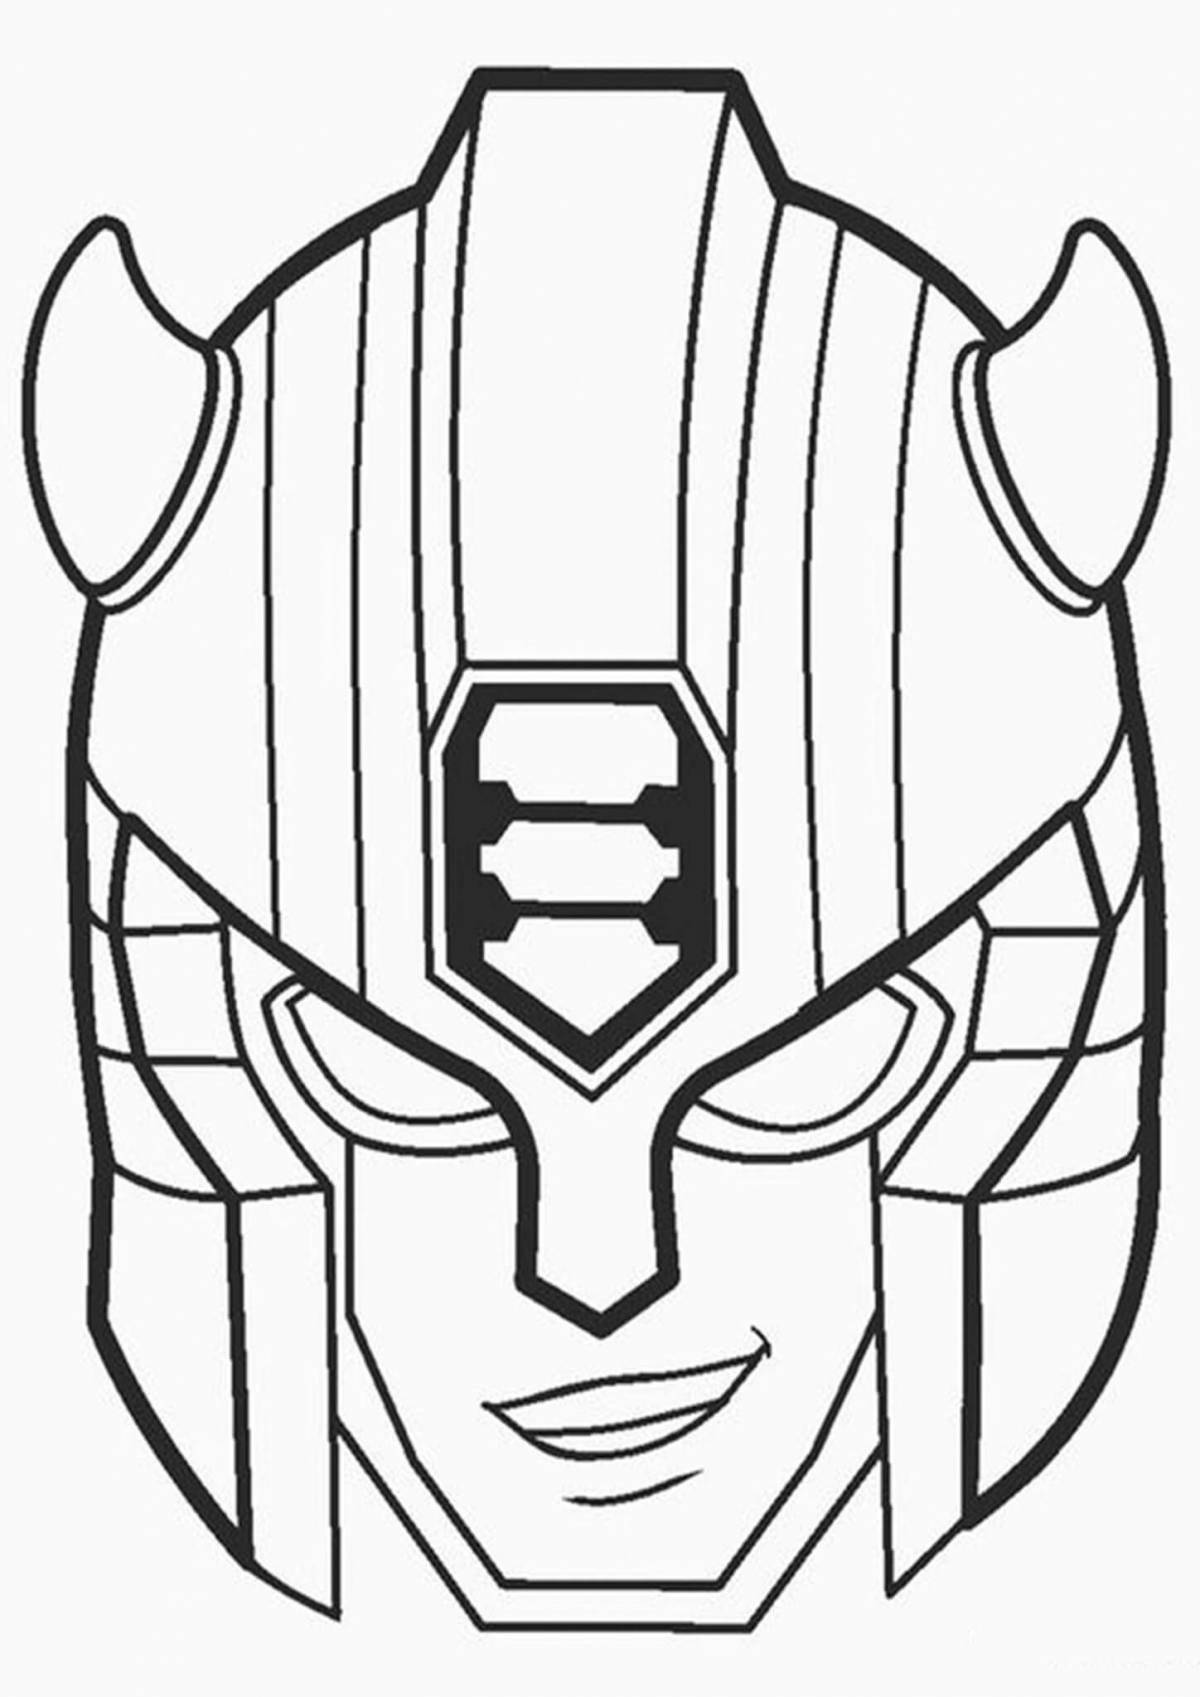 Great bumblebee mask coloring page